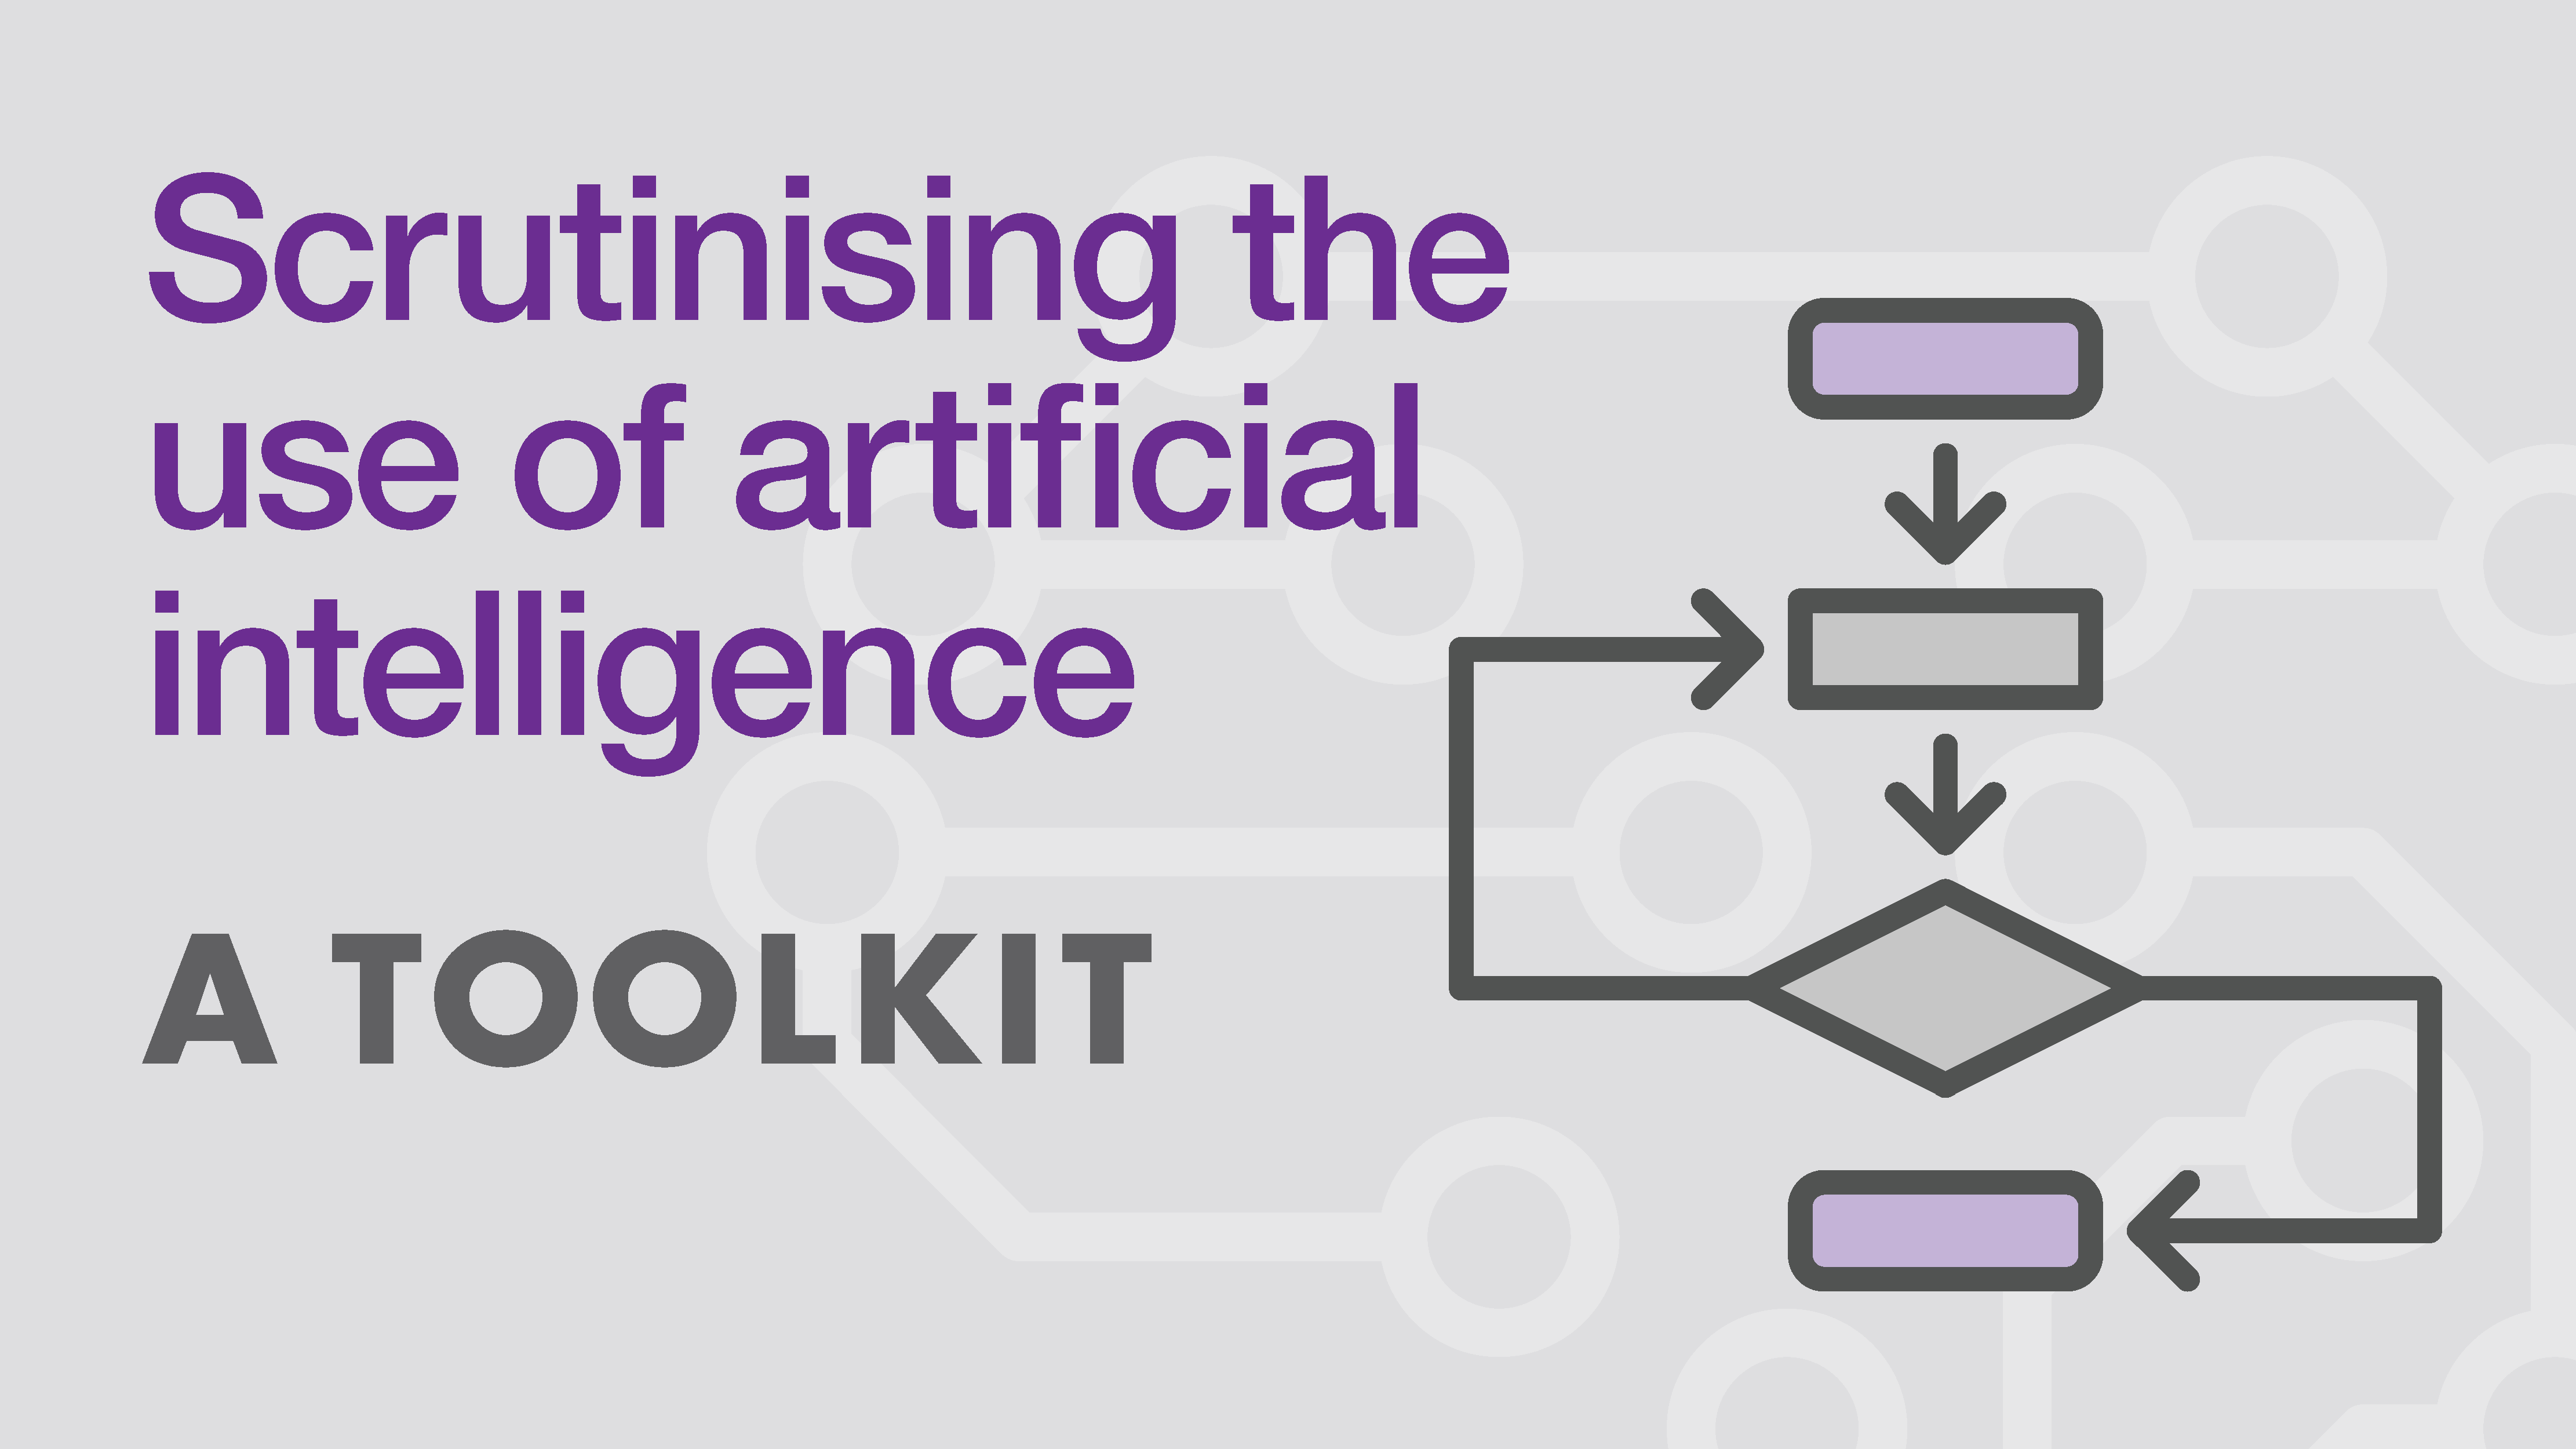 Image of AI Toolkit drawing